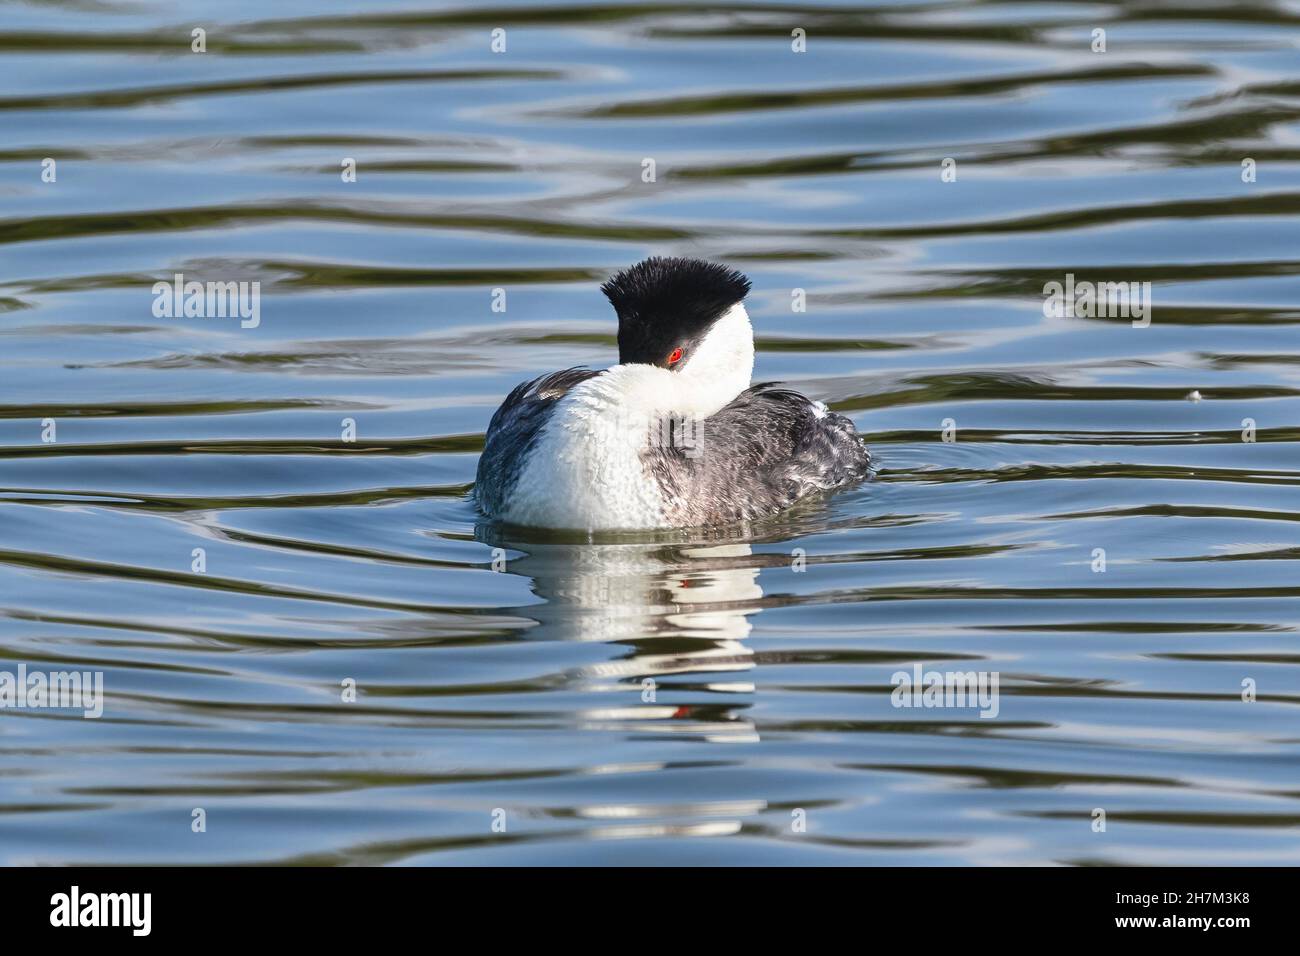 A closeup view of a Western Grebe peacefully floating in a lake, with its bill tucked under its prominent neck, and its beautiful red eye visible. Stock Photo